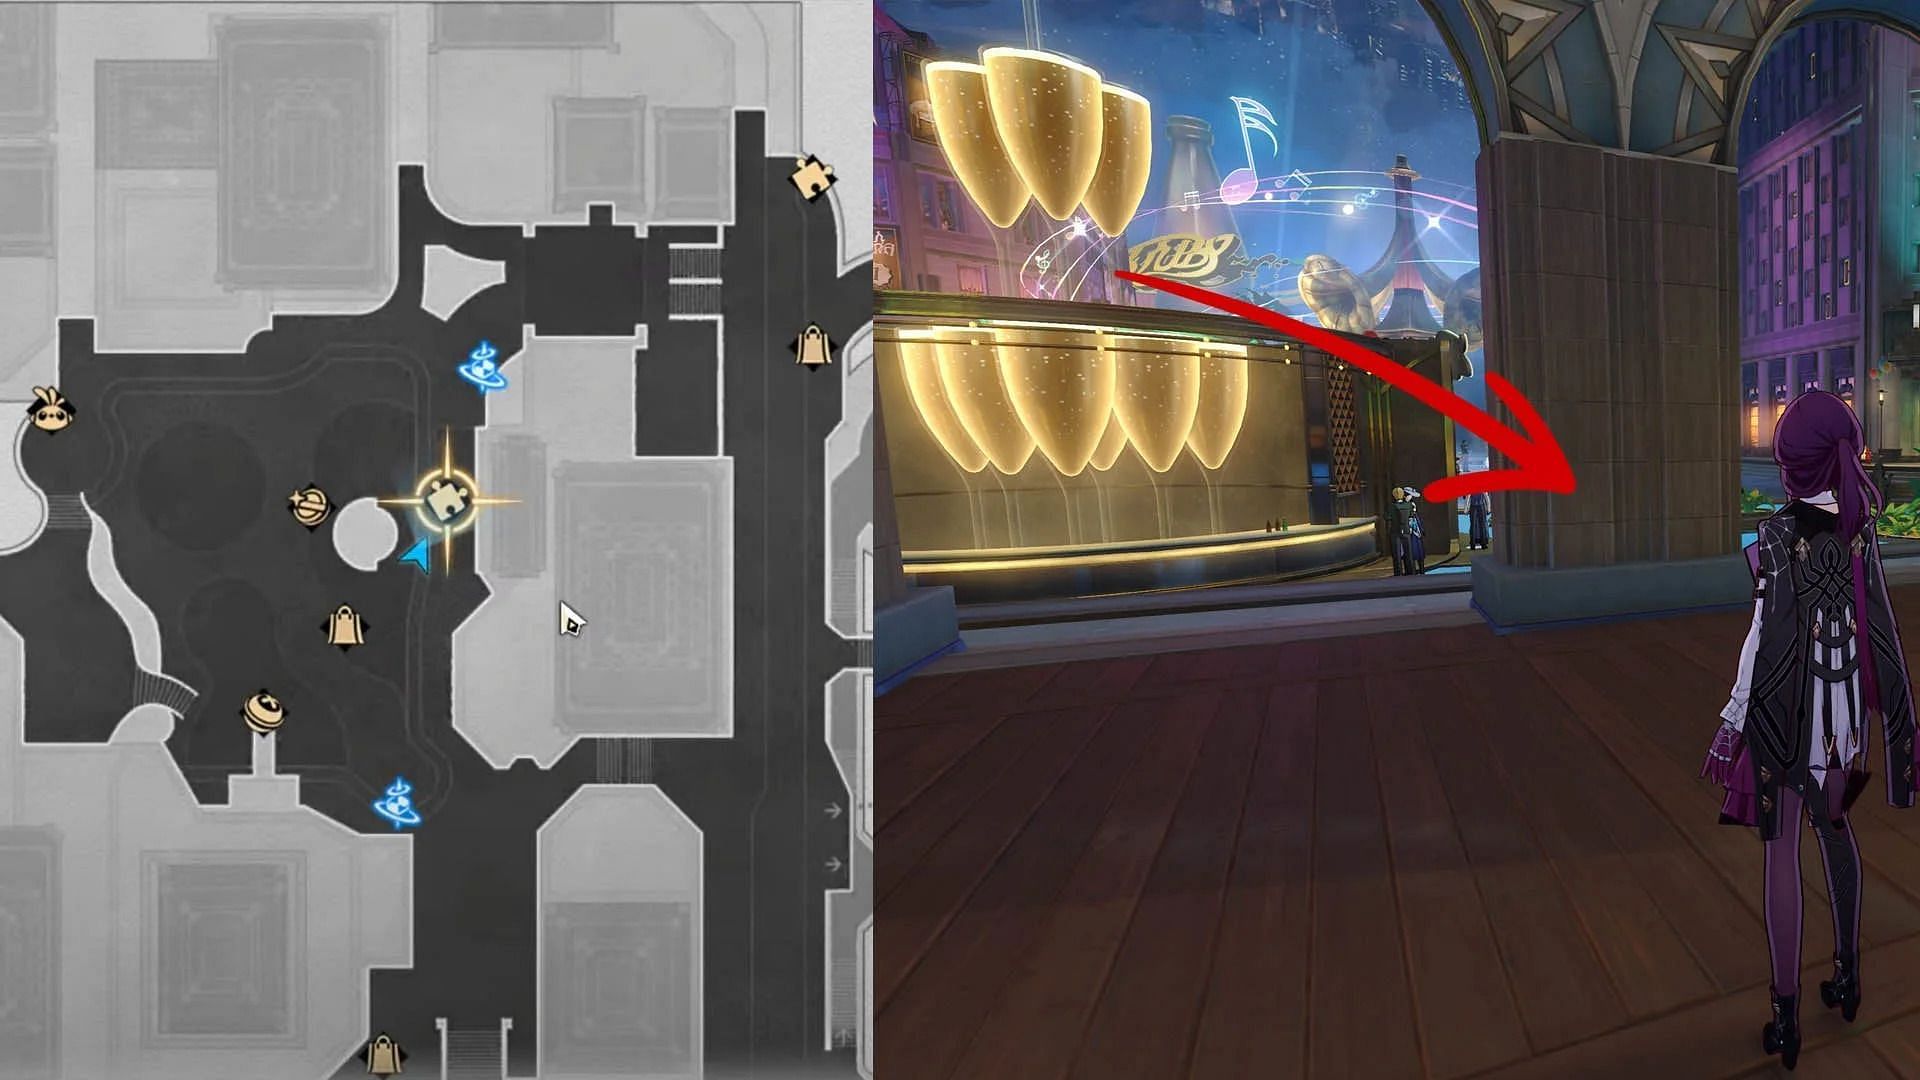 Location of Puzzle 2 in Star Rail (Image via HoYoverse)